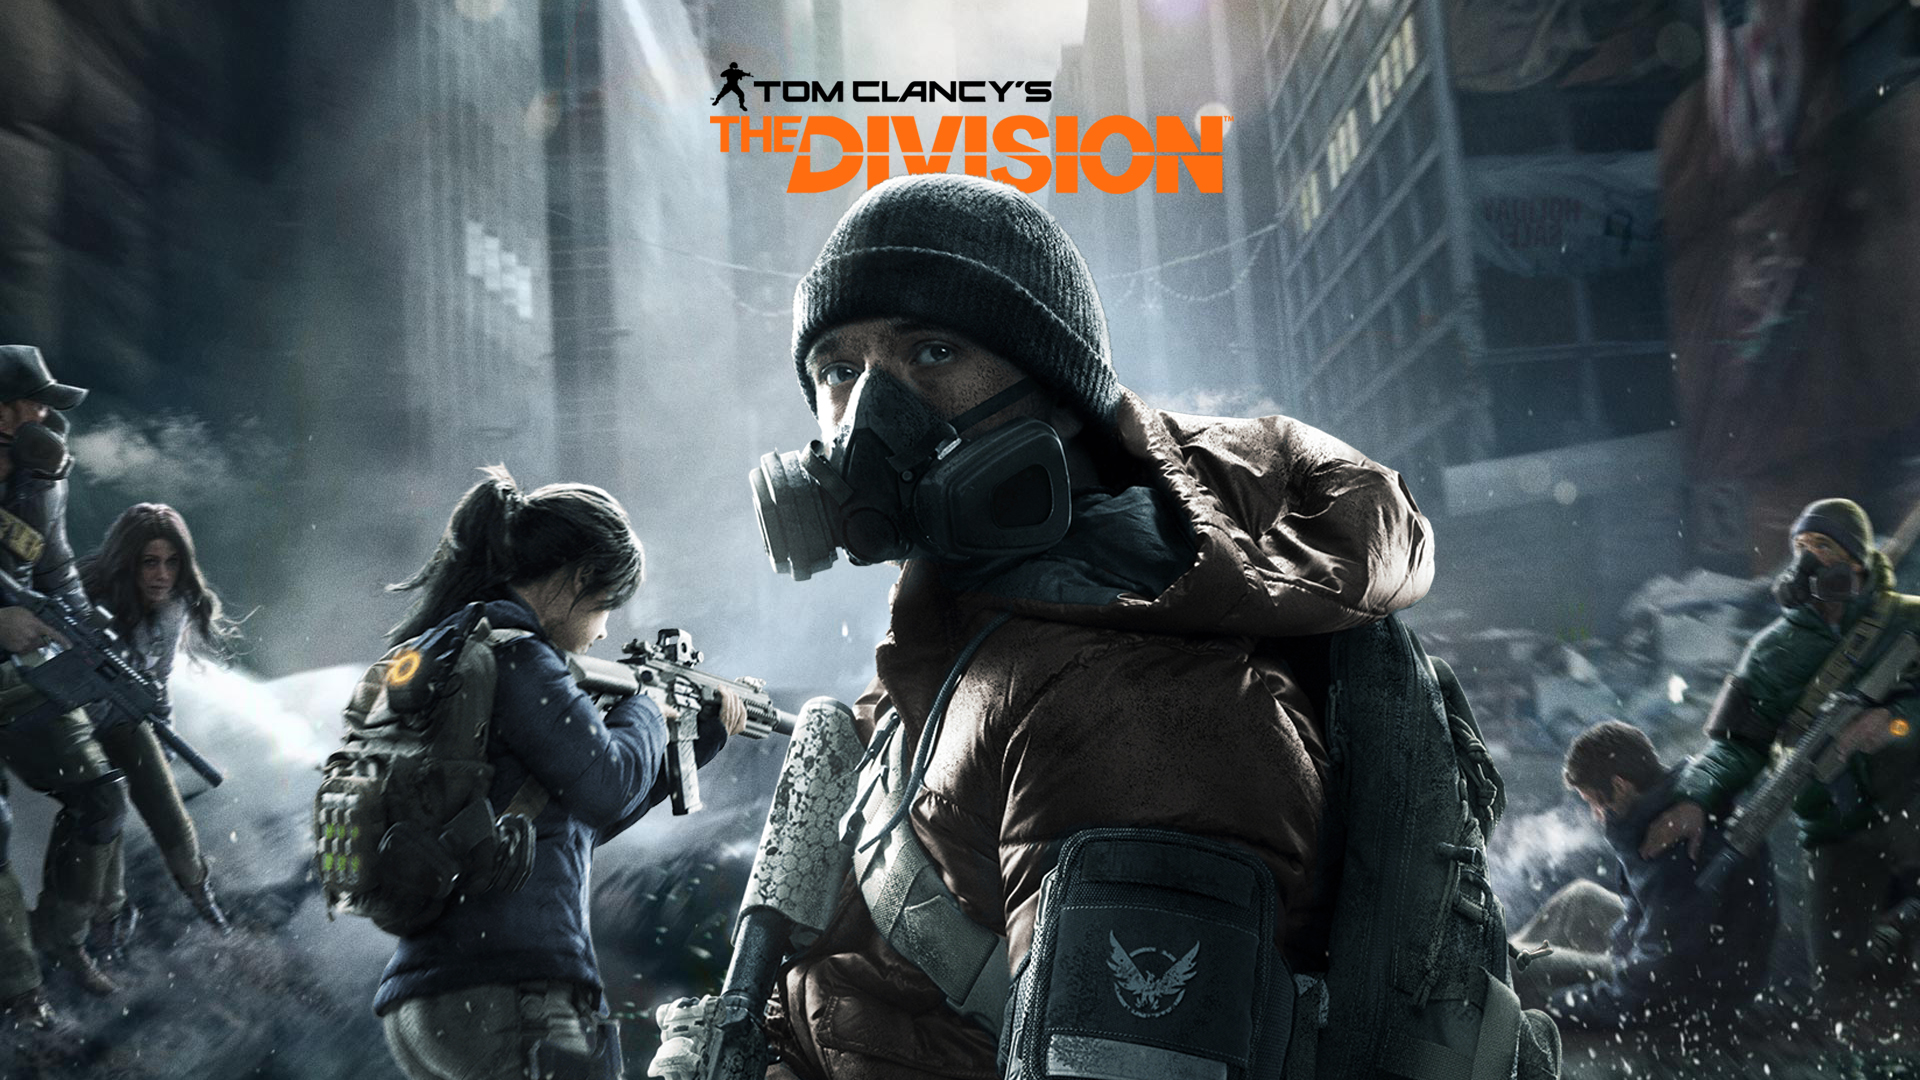 tom clancy's the division wallpaper,action adventure game,shooter game,pc game,games,movie